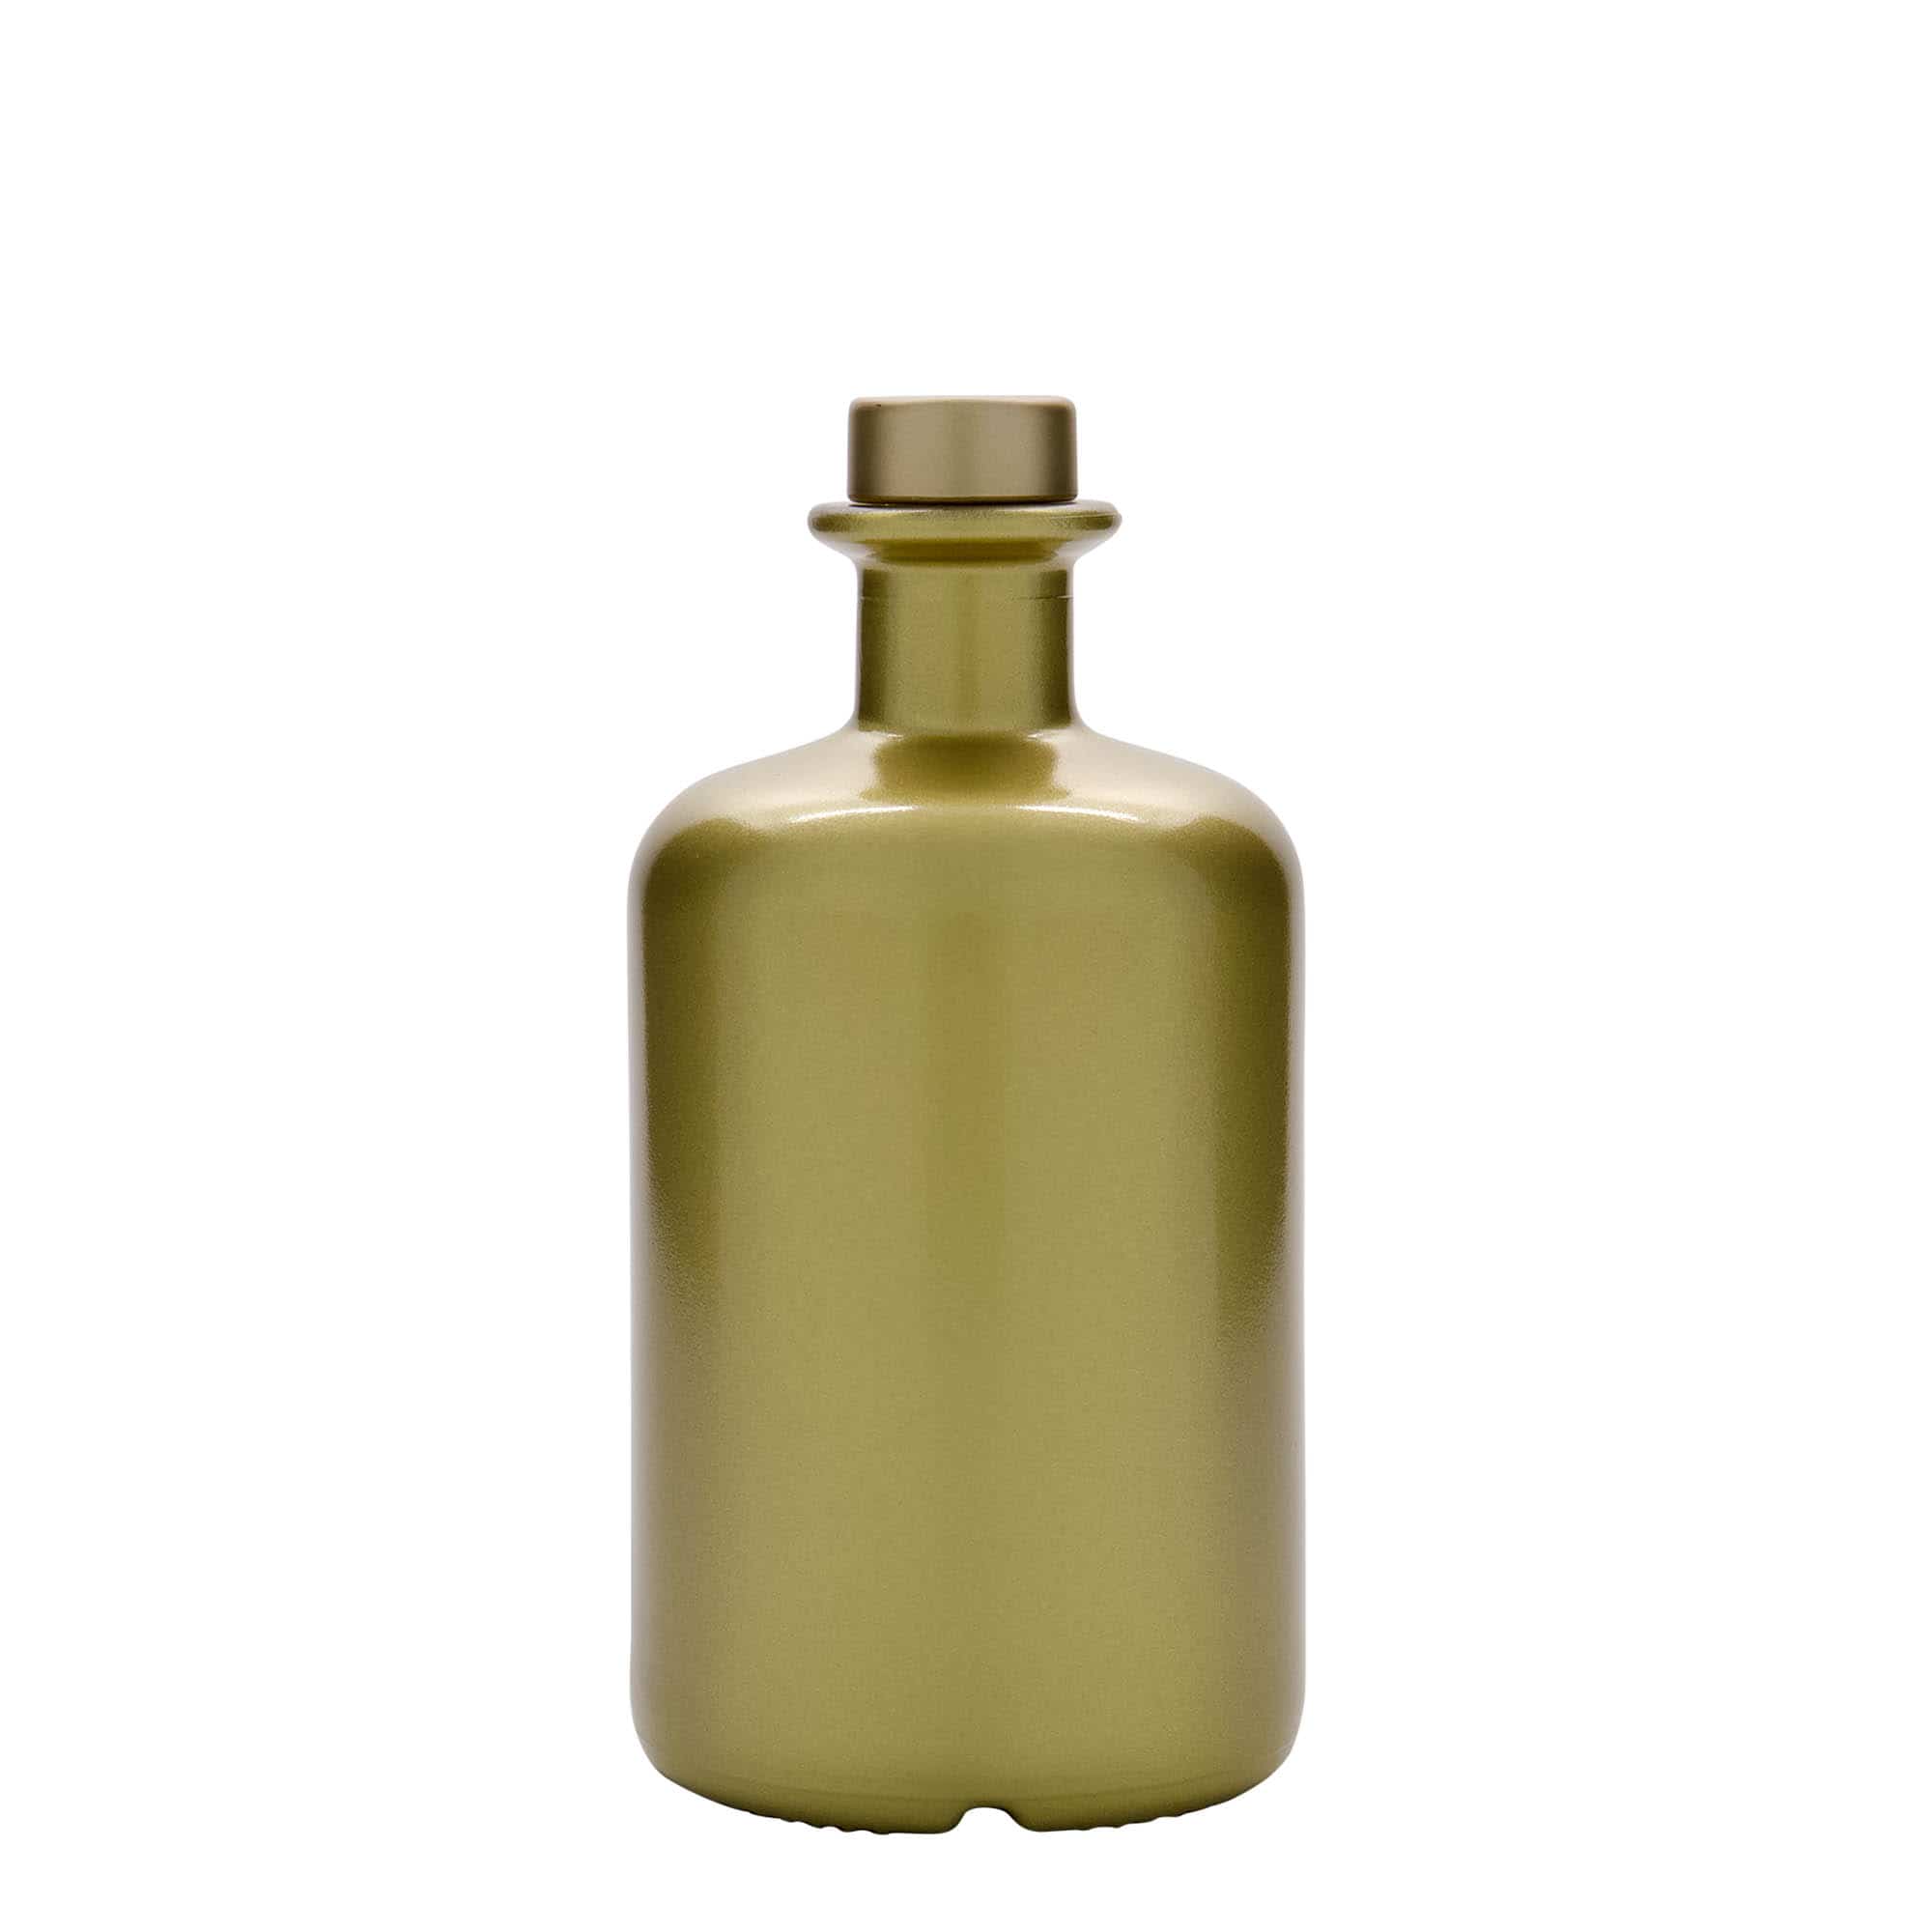 500 ml glass apothecary bottle, gold, closure: cork